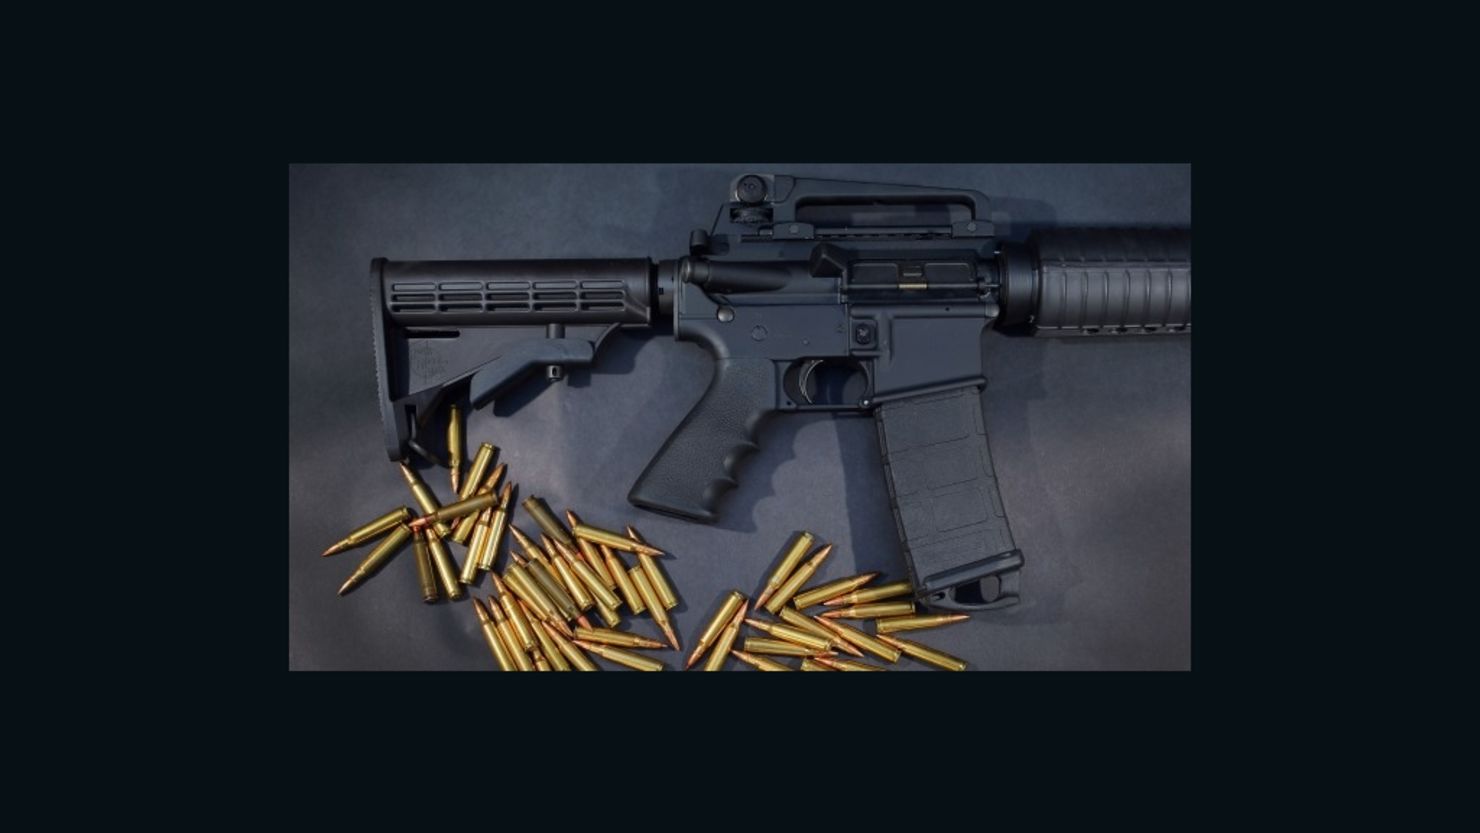 The AR-15s are valued about $800 each.